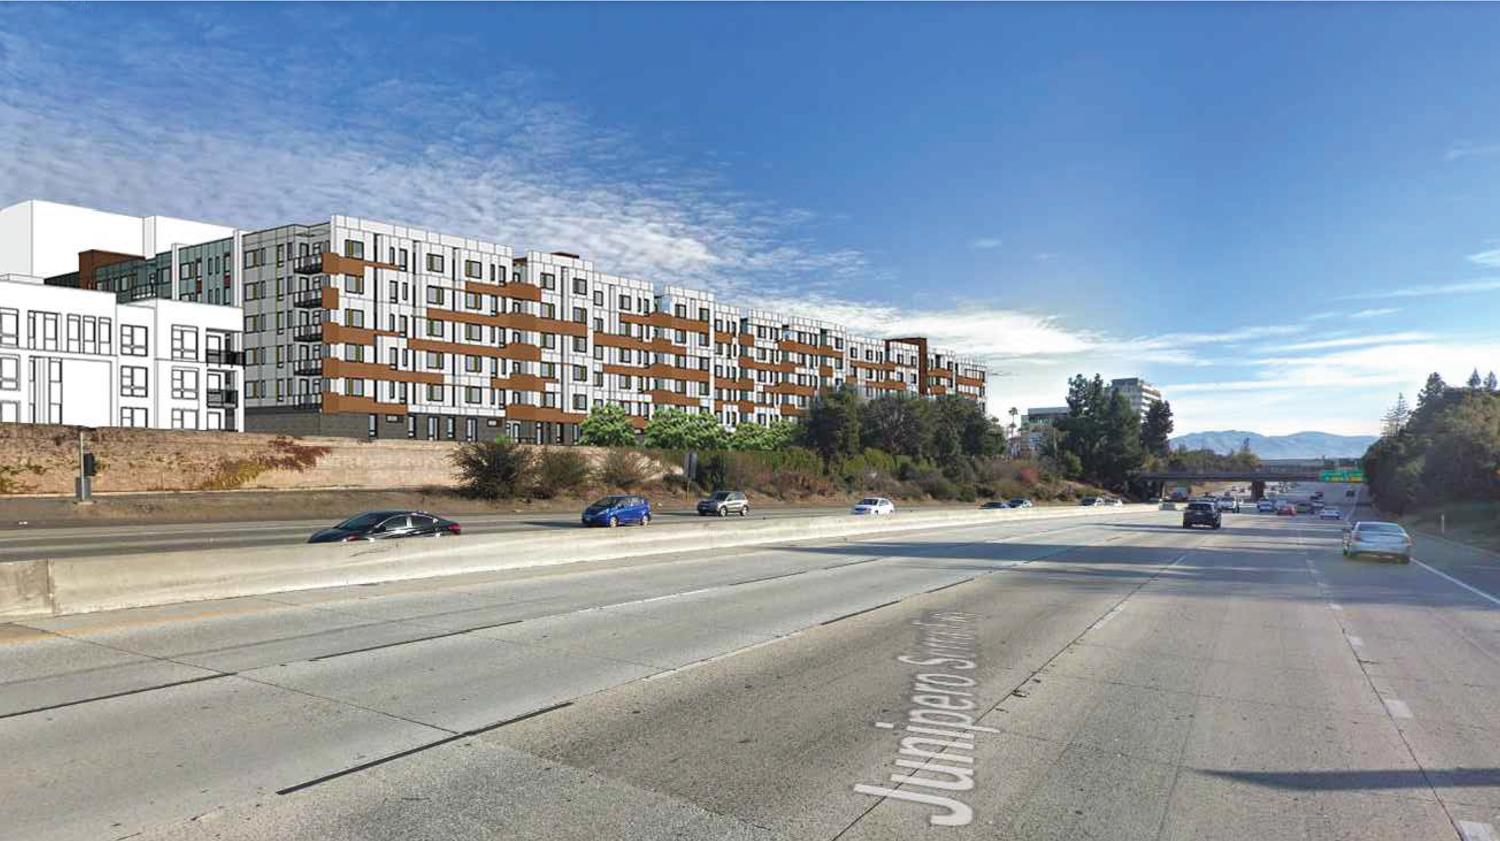 500 Charles Cali Drive seen from the I 280, rendering by KTGY